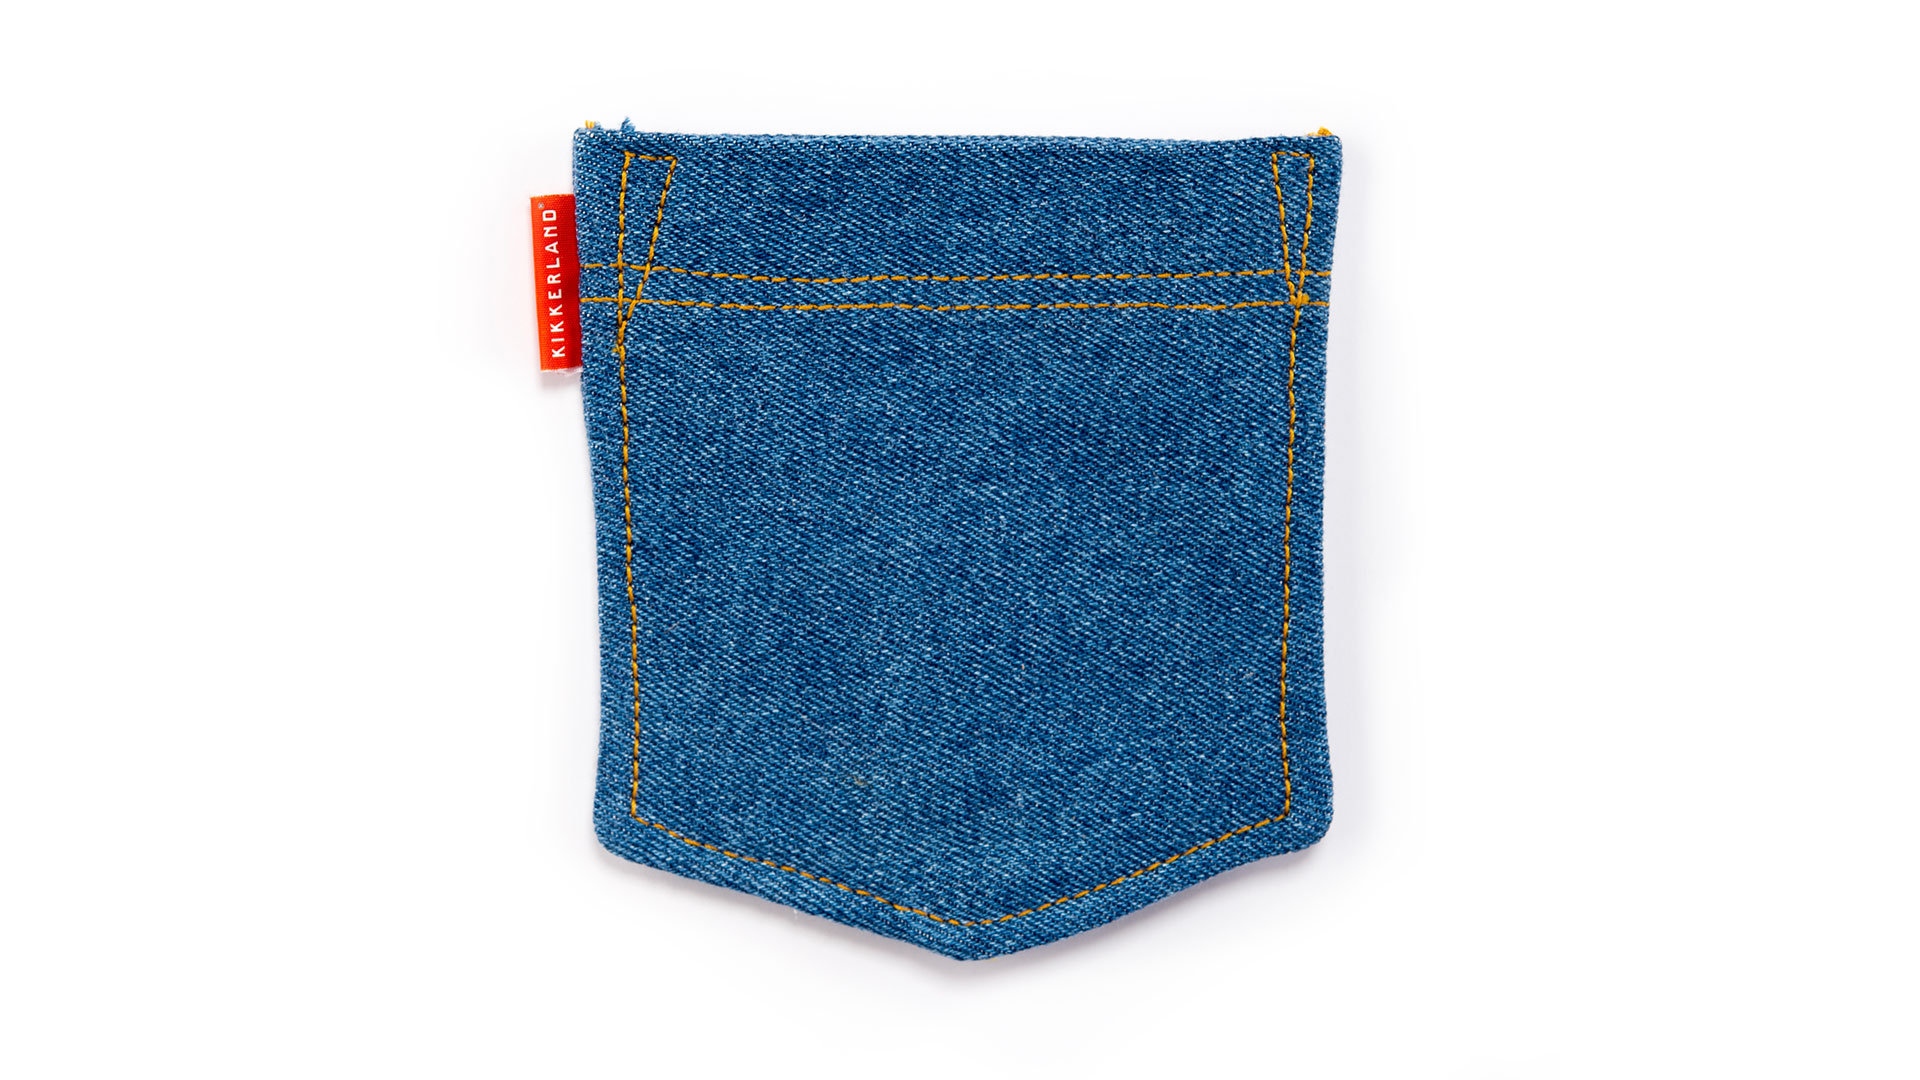 Blue denim pocket that comes to point at base with small red tag at top of left side